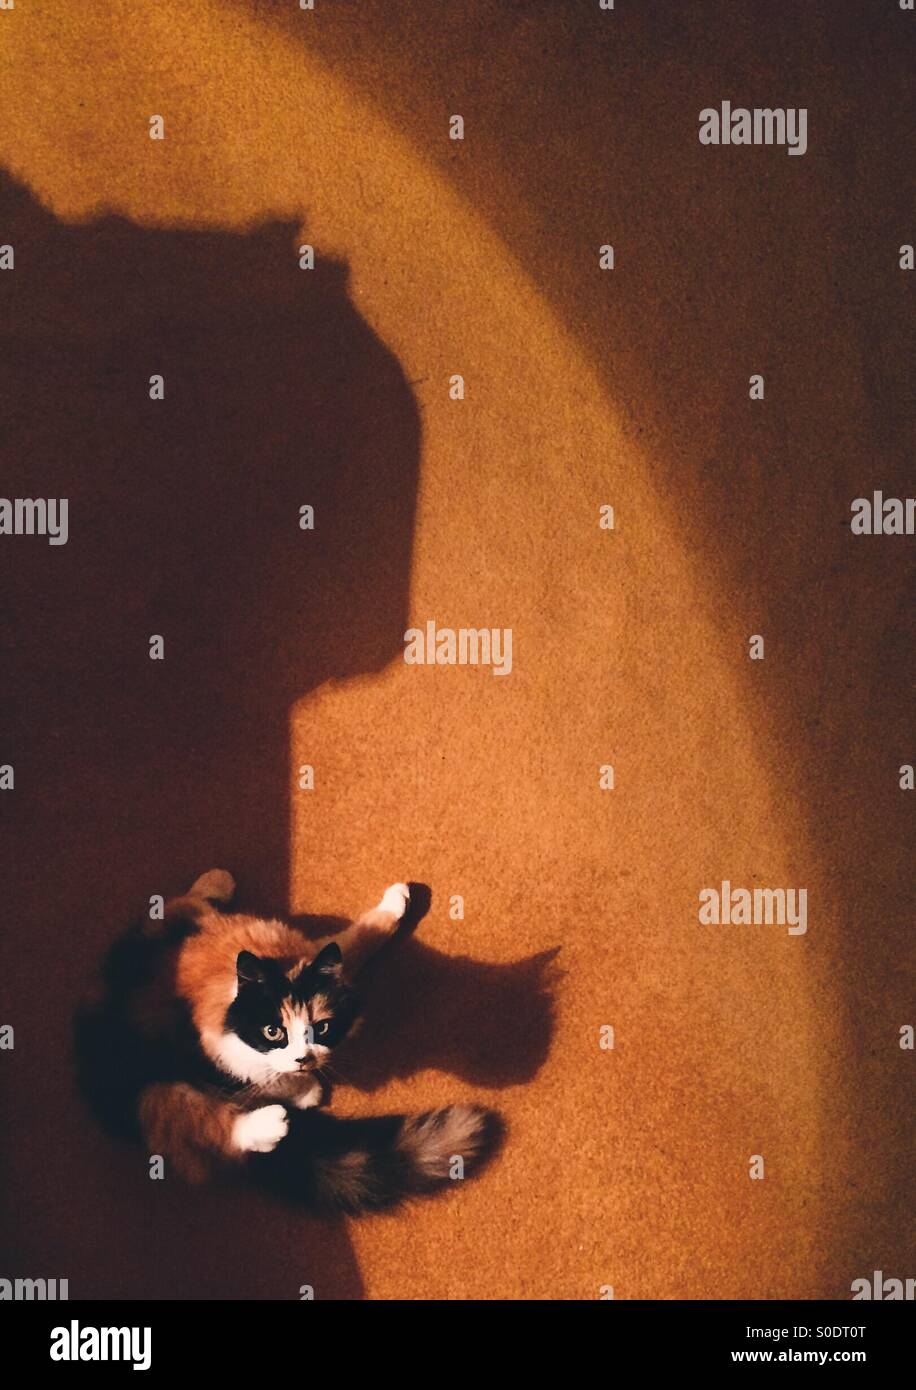 Camoflage cat is spooked by shadows Stock Photo